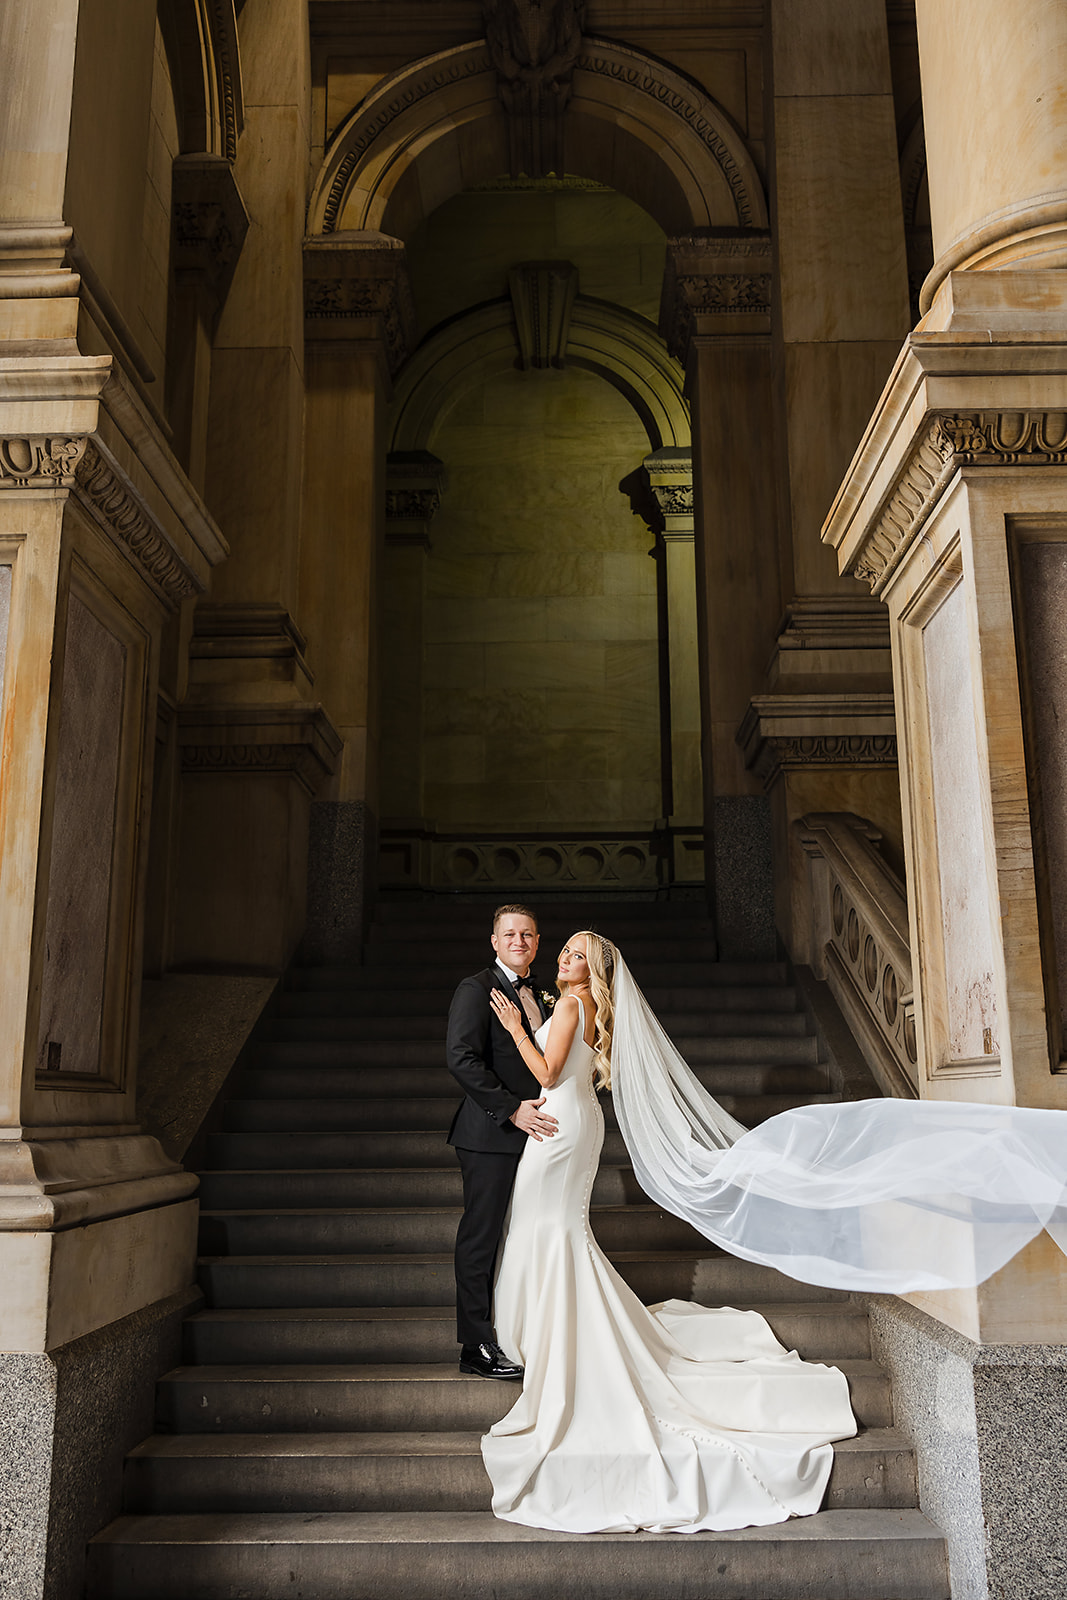 City hall Philadelphia wedding photo of the bride and groom with flowing veil on the steps 